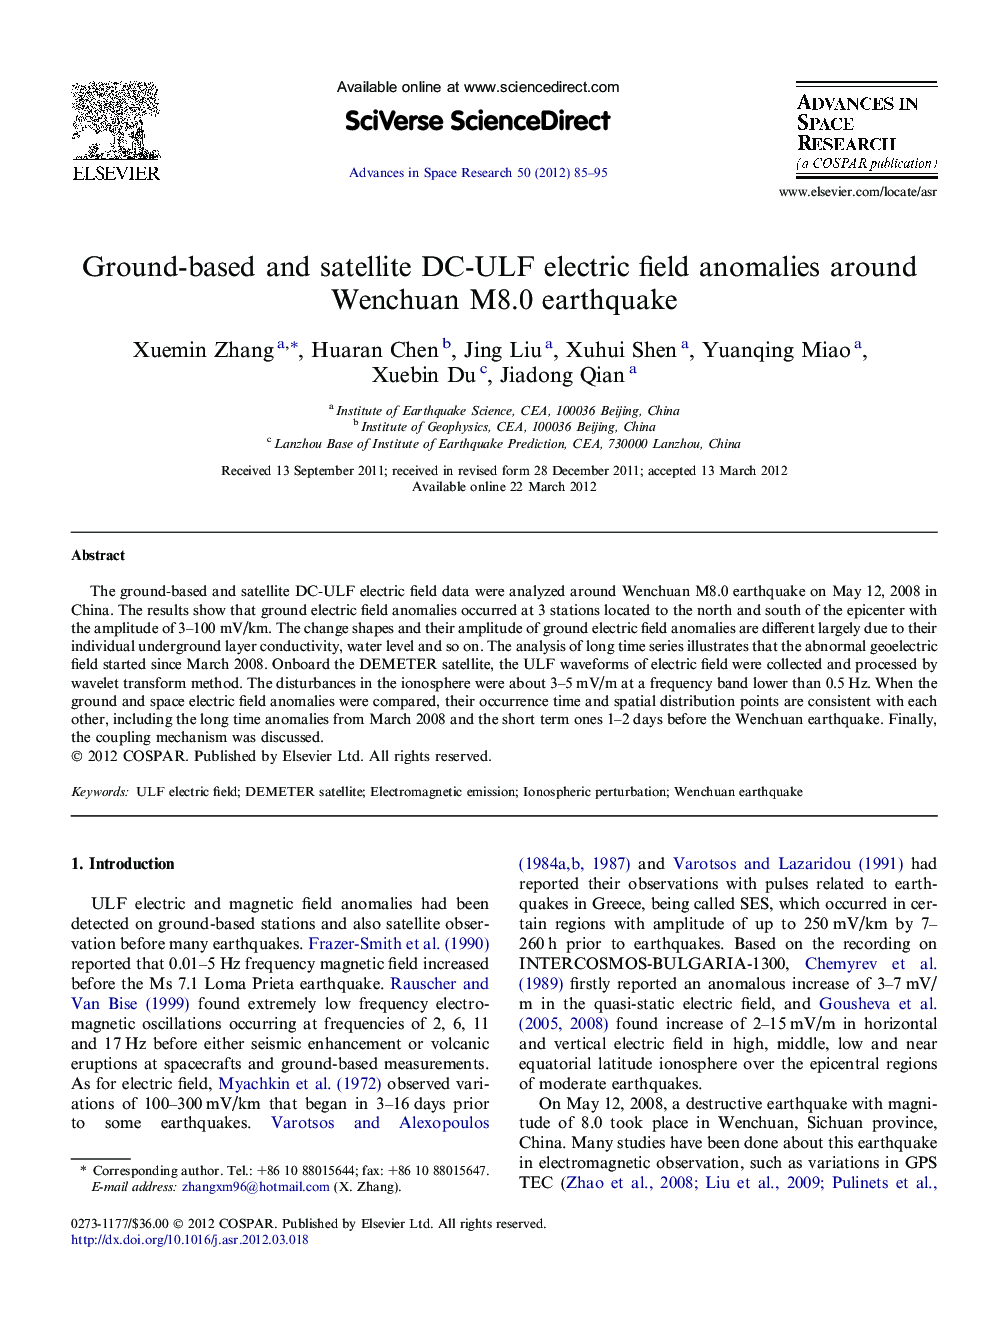 Ground-based and satellite DC-ULF electric field anomalies around Wenchuan M8.0 earthquake